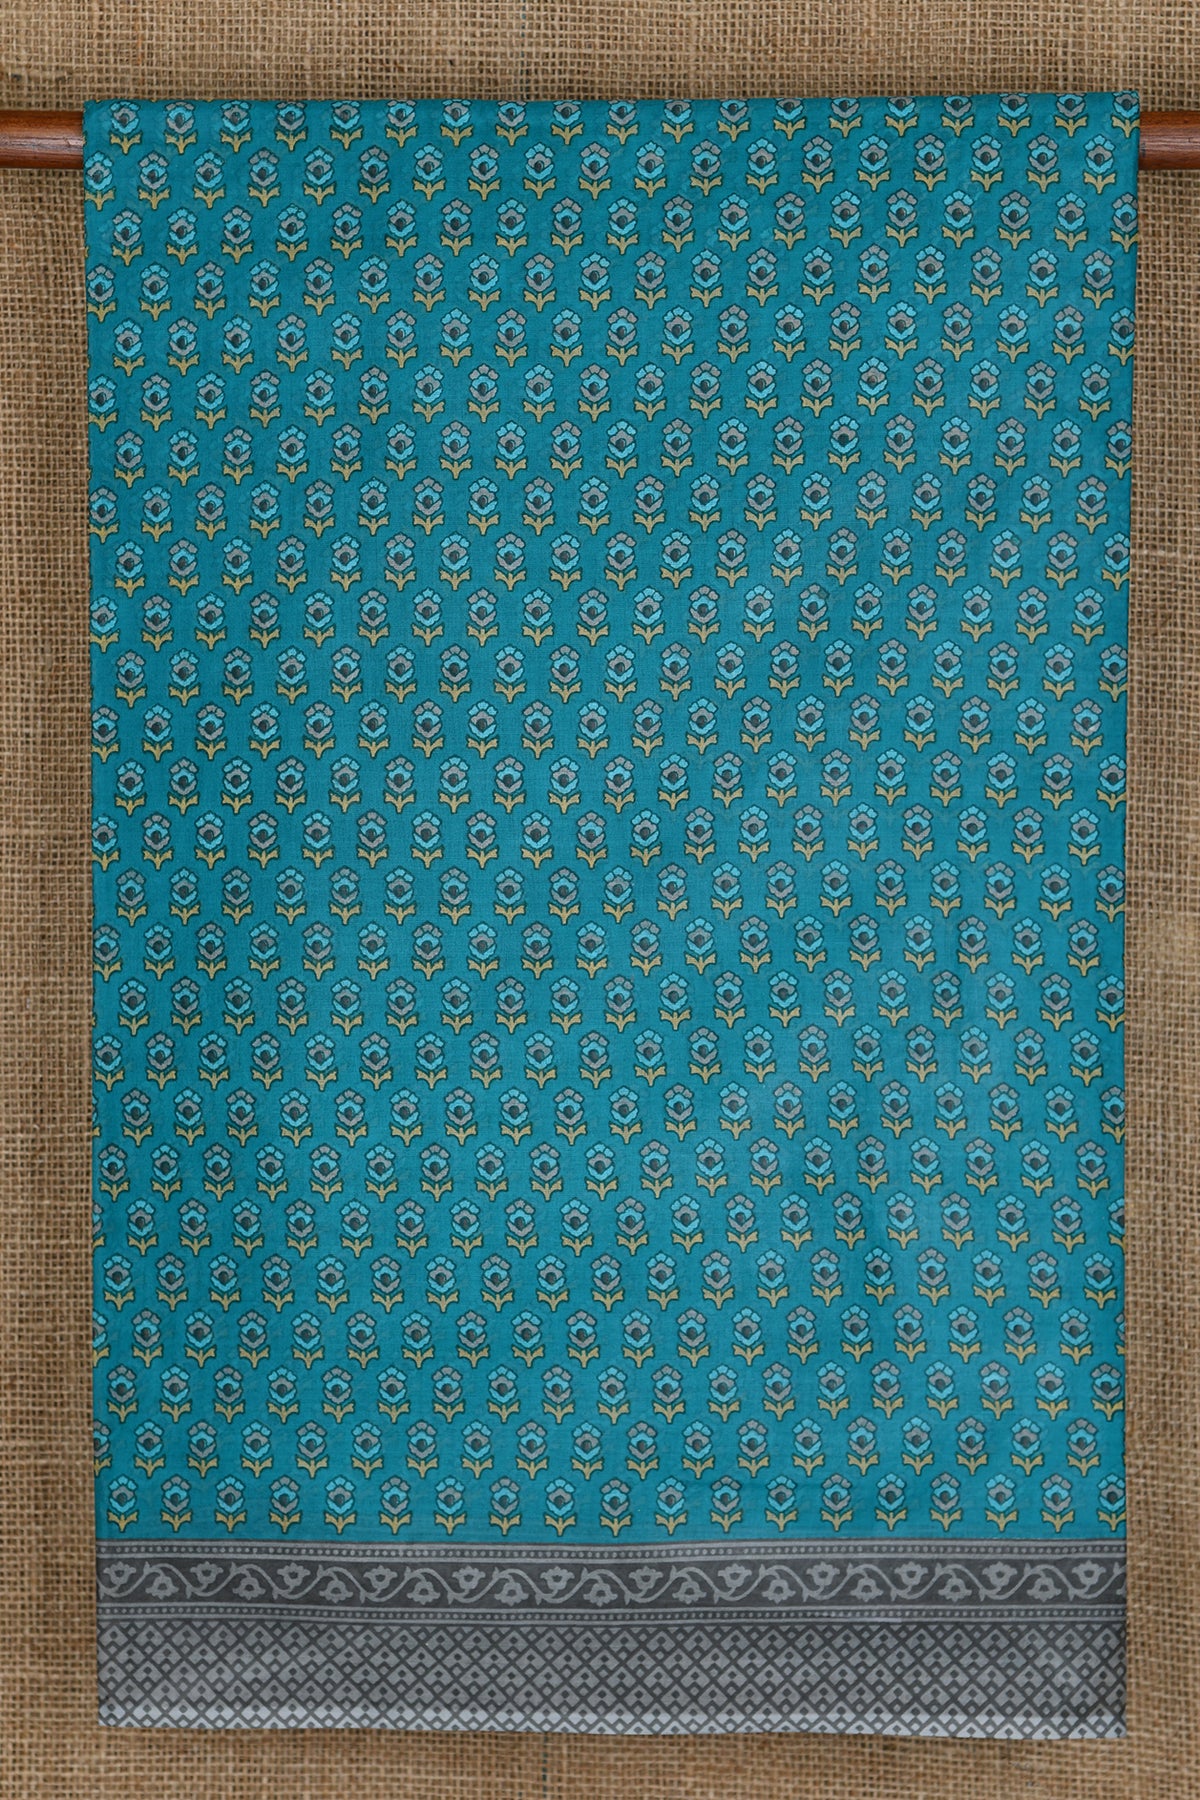 Small Floral Buttis Teal Blue Ahmedabad Cotton Saree